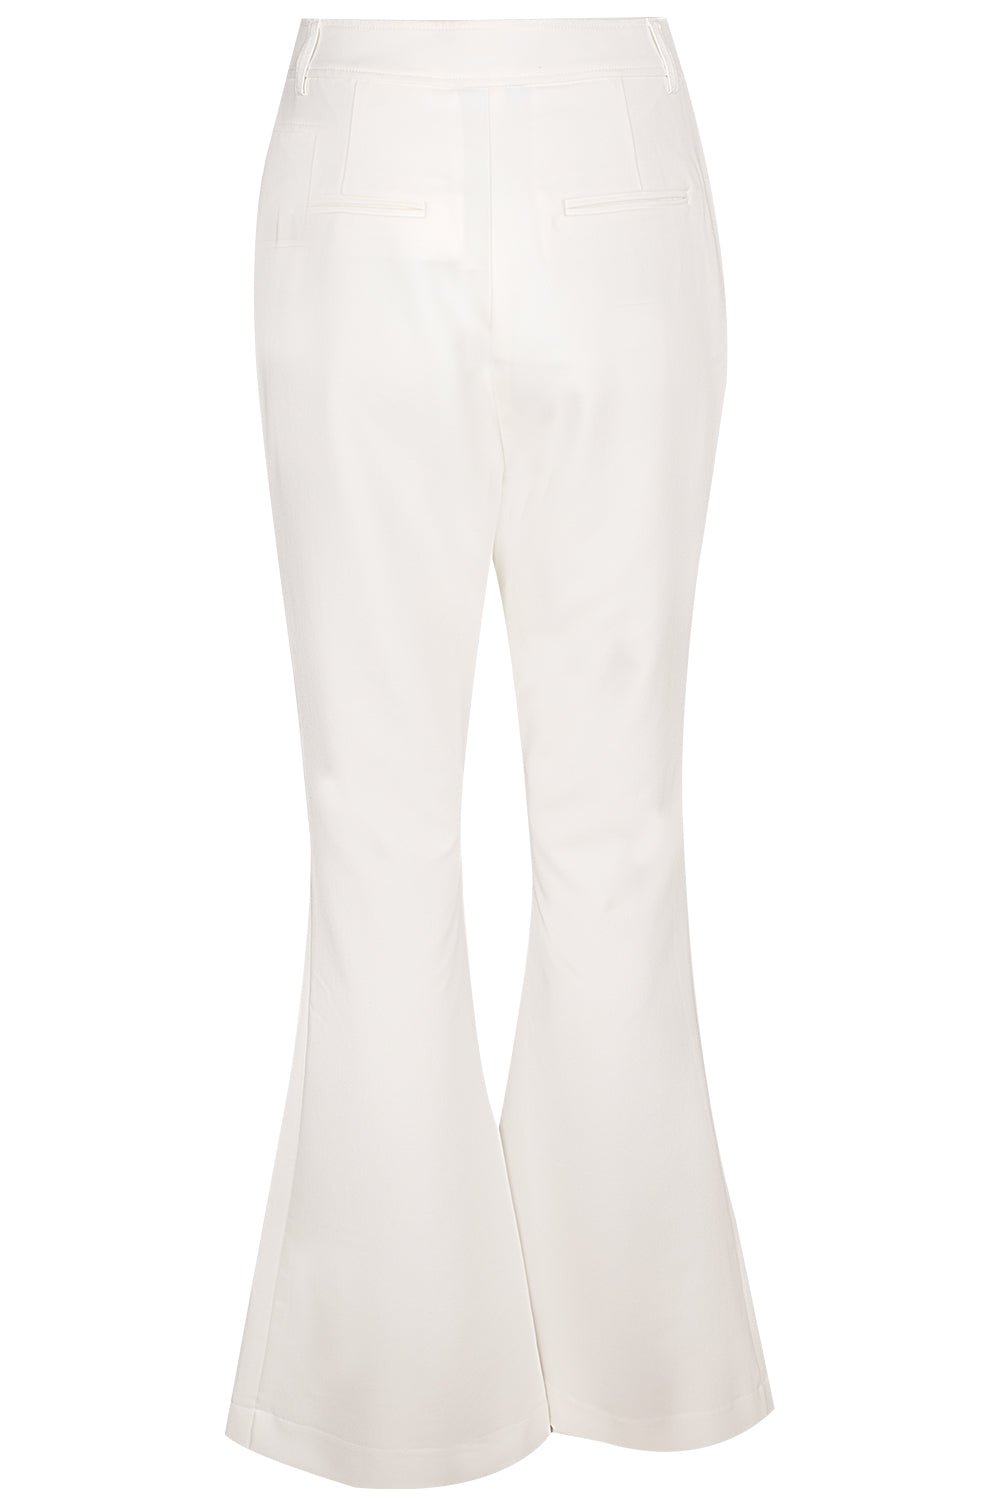 ACLER-Wirra Pant-